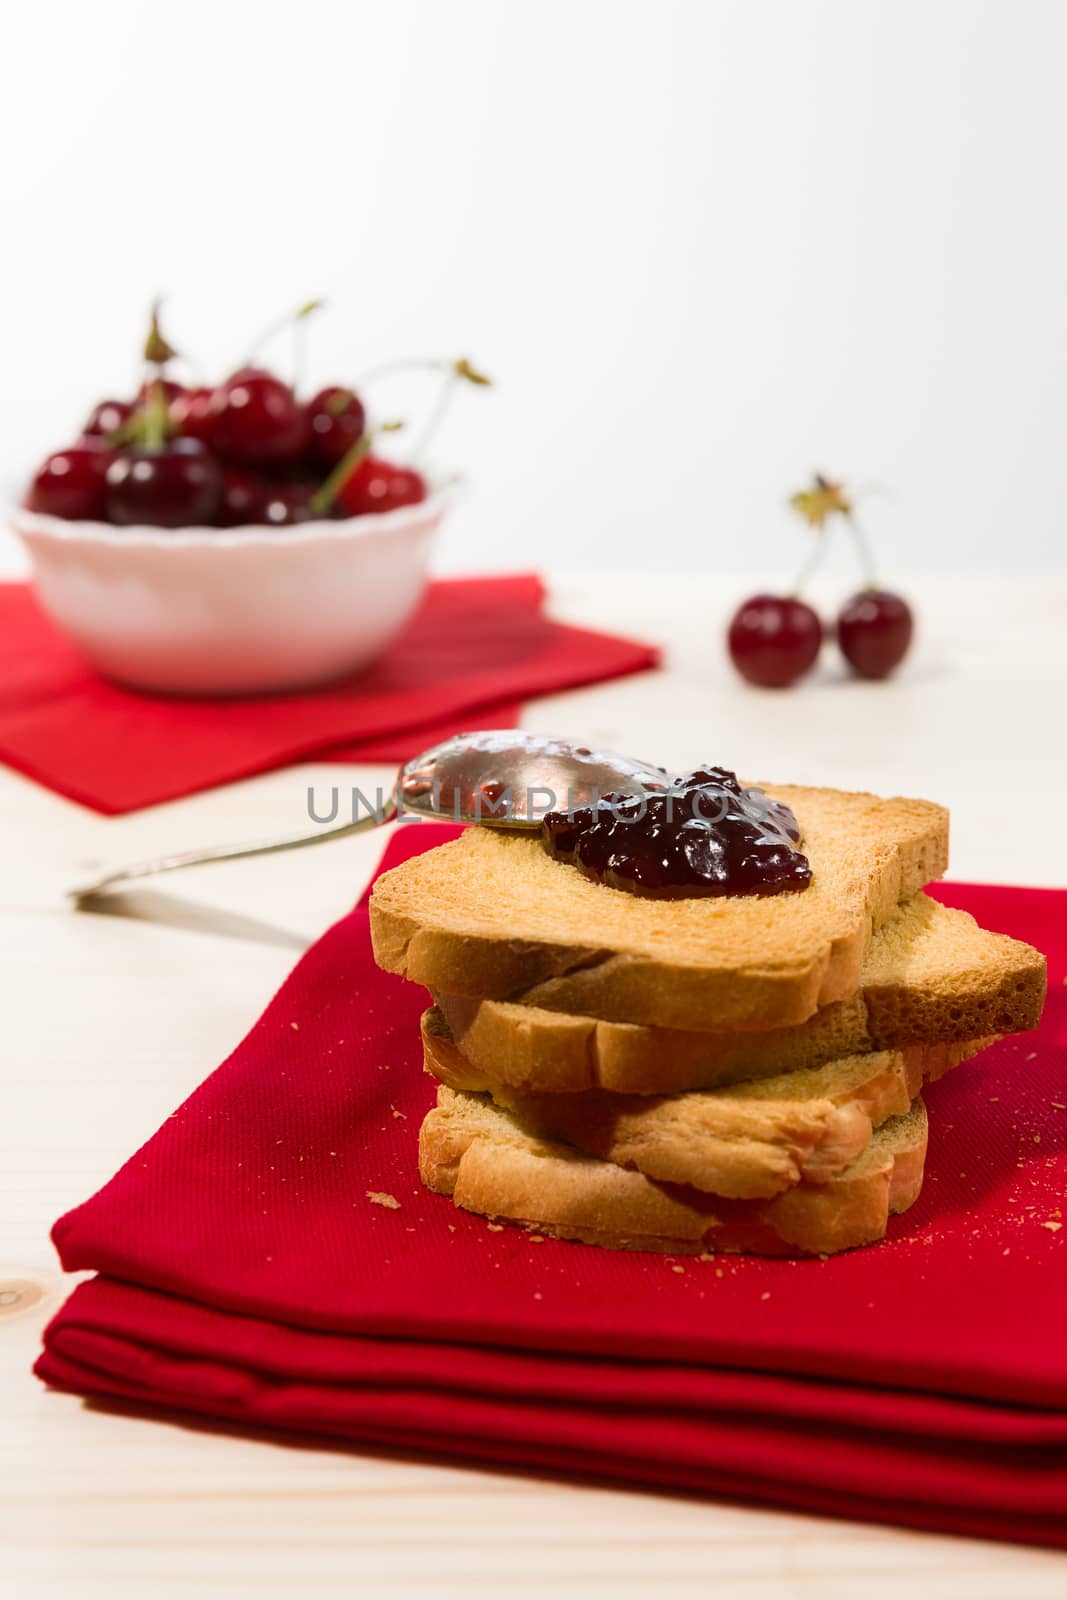 Rusk with cherry jam over a red napkin by LuigiMorbidelli